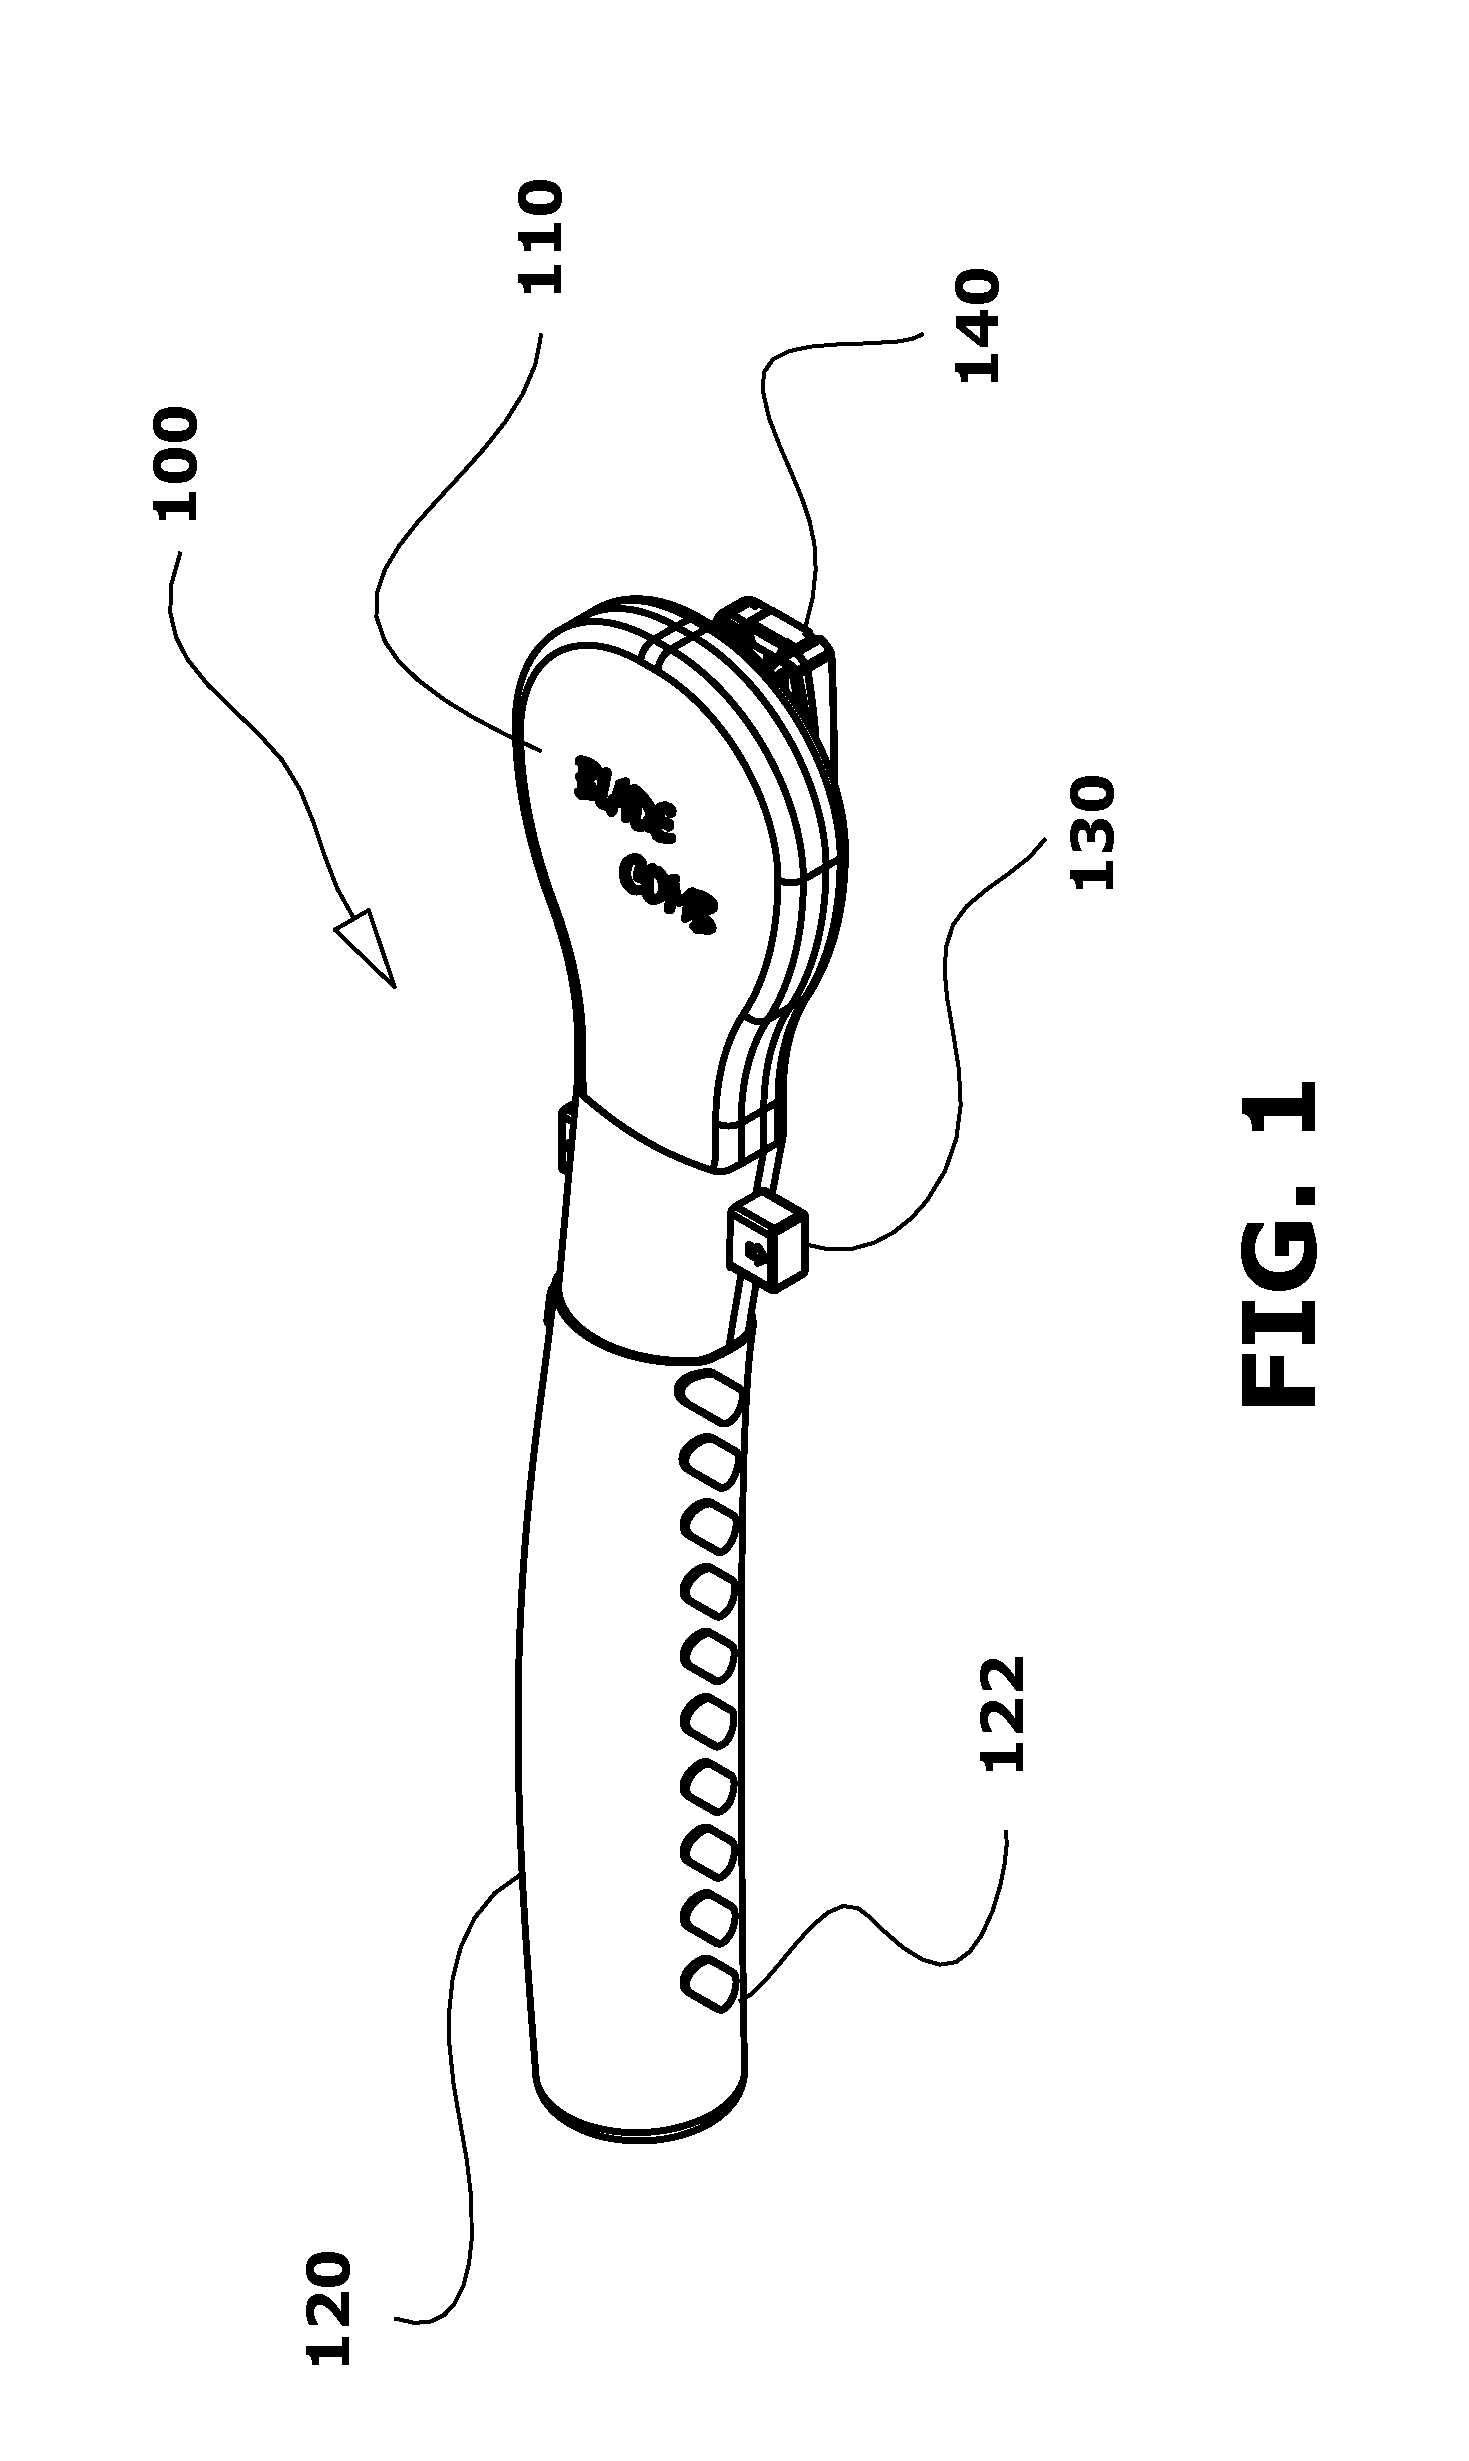 Personal Grooming Device